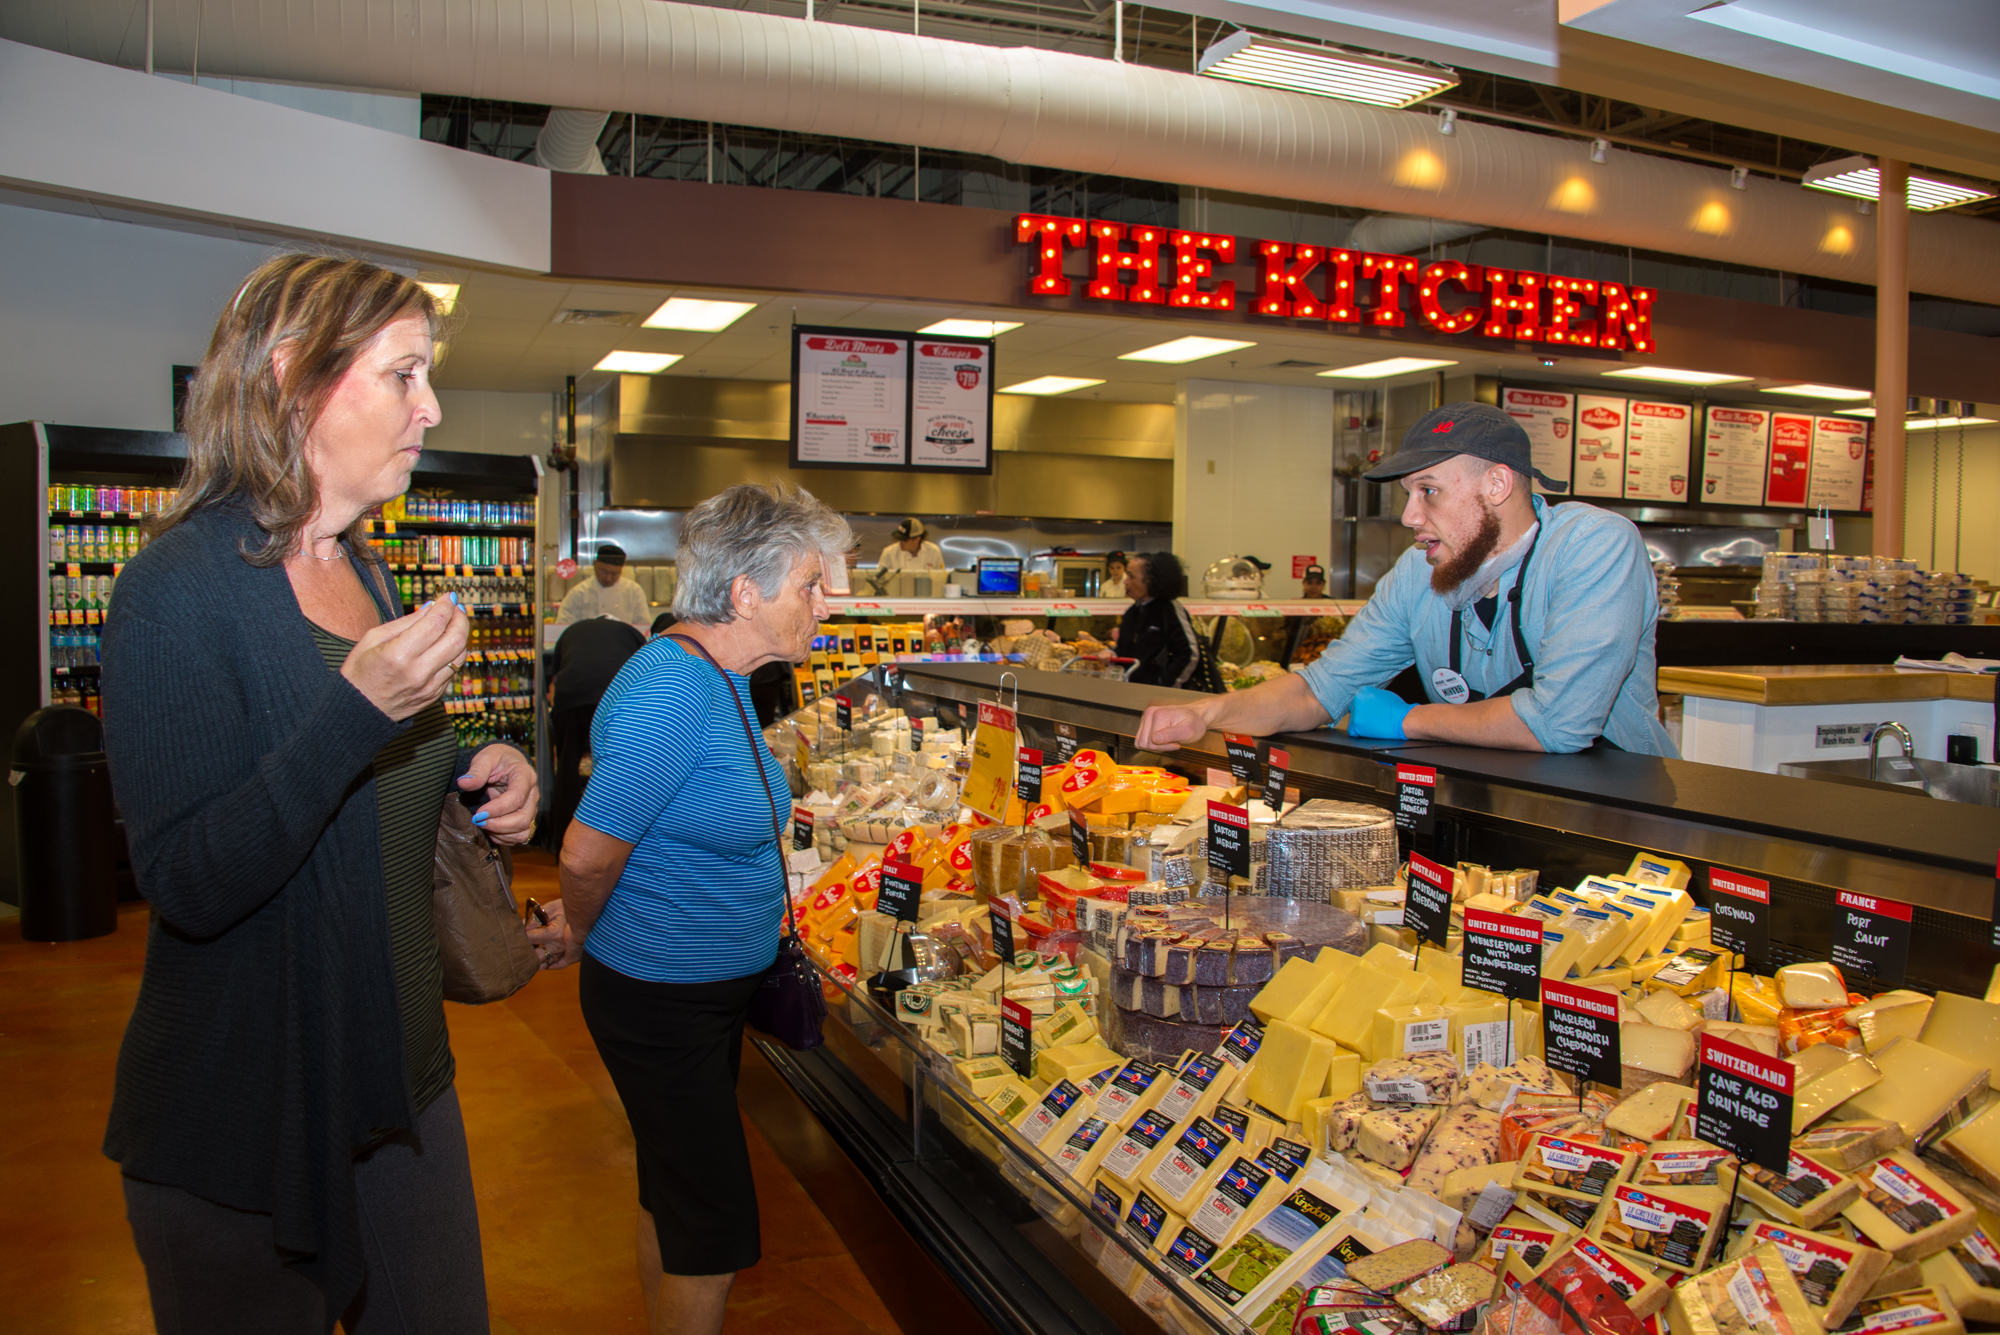 Customers tasting fresh cheese samples at the new Lucky’s Market.